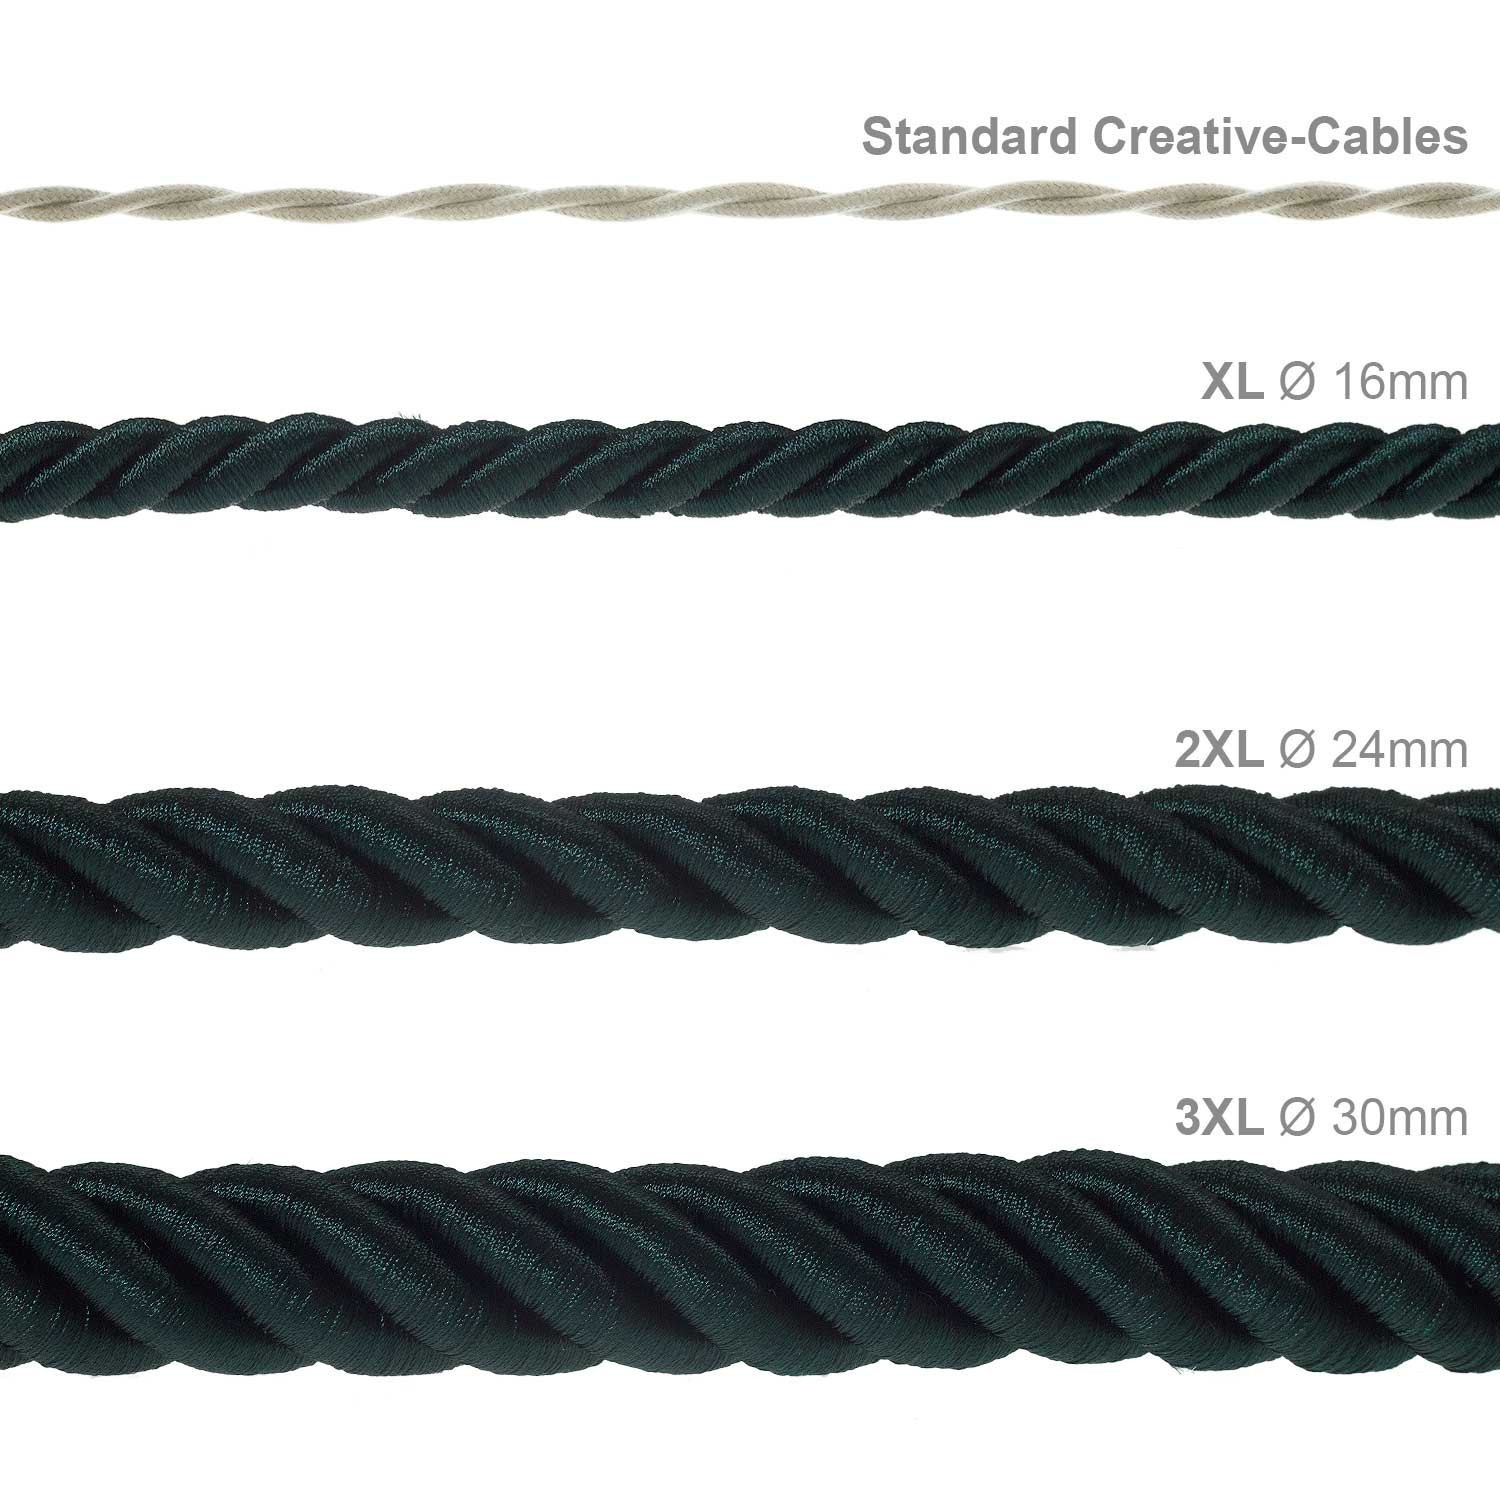 2XL electrical cord, electrical cable 3x0,75. Shiny dark green fabric covering. Diameter 24mm.